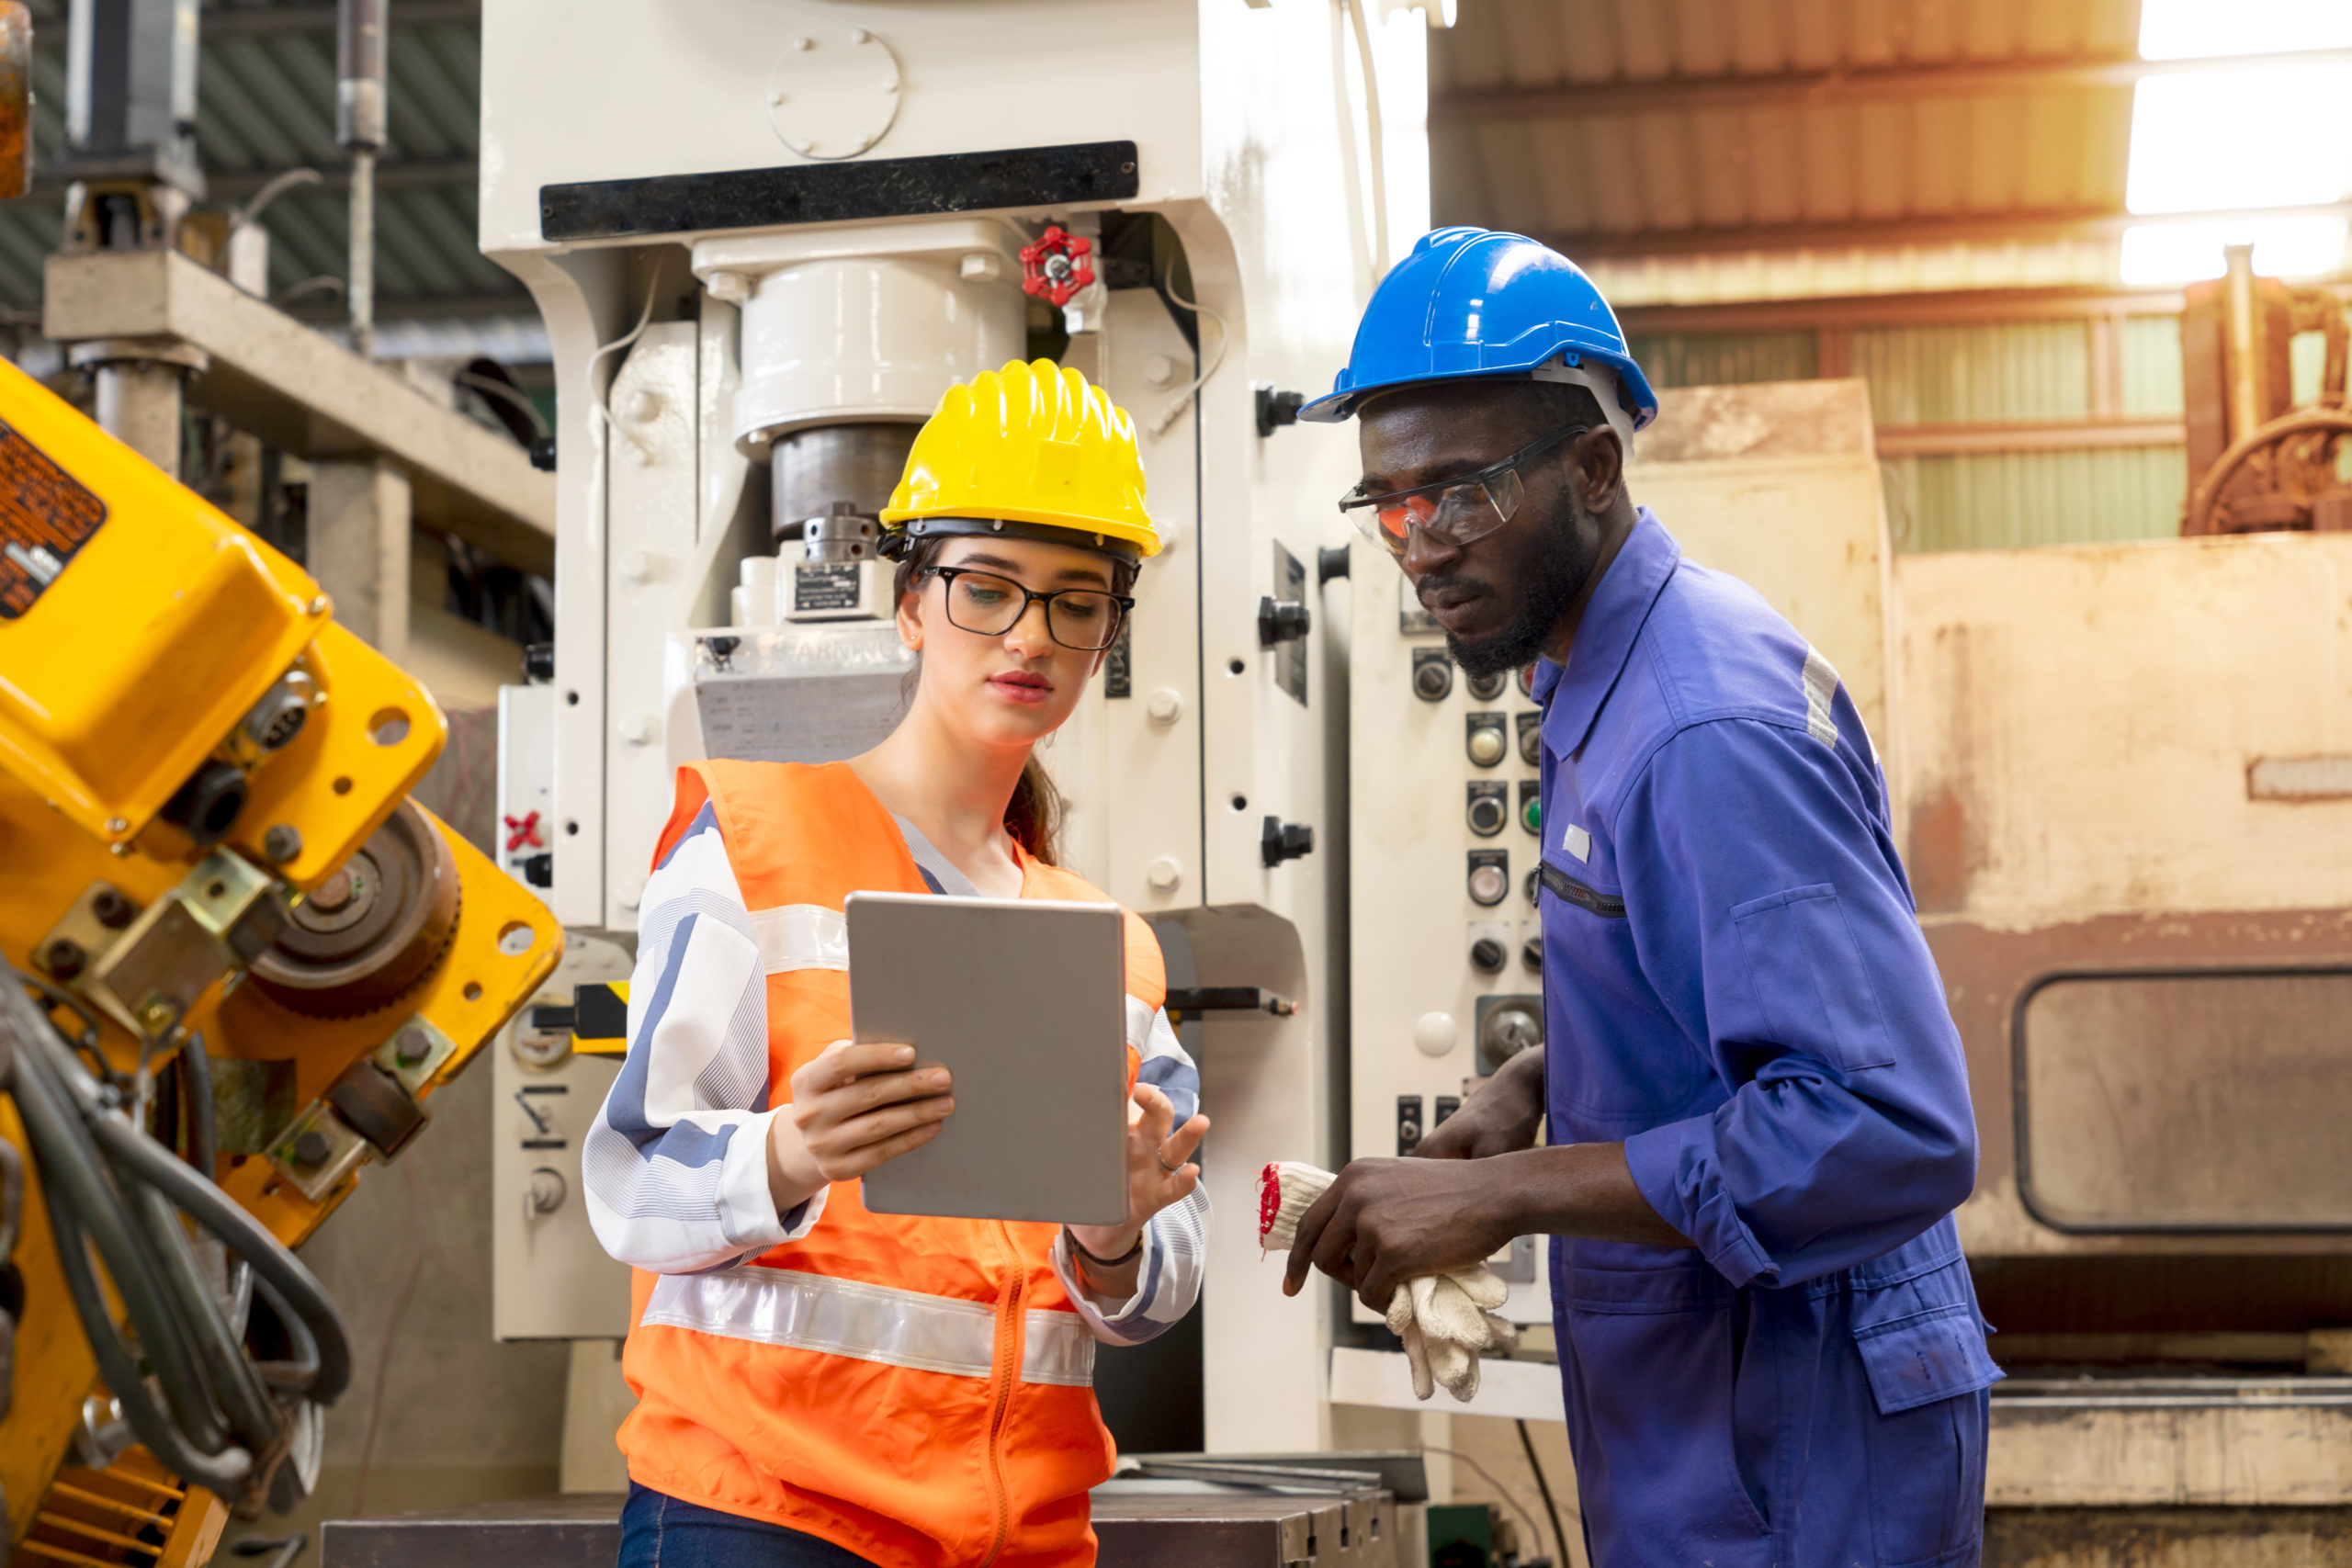 woman wearing hard hat consults with man wearing hard hat while looking at a tablet in a manufacturing facility